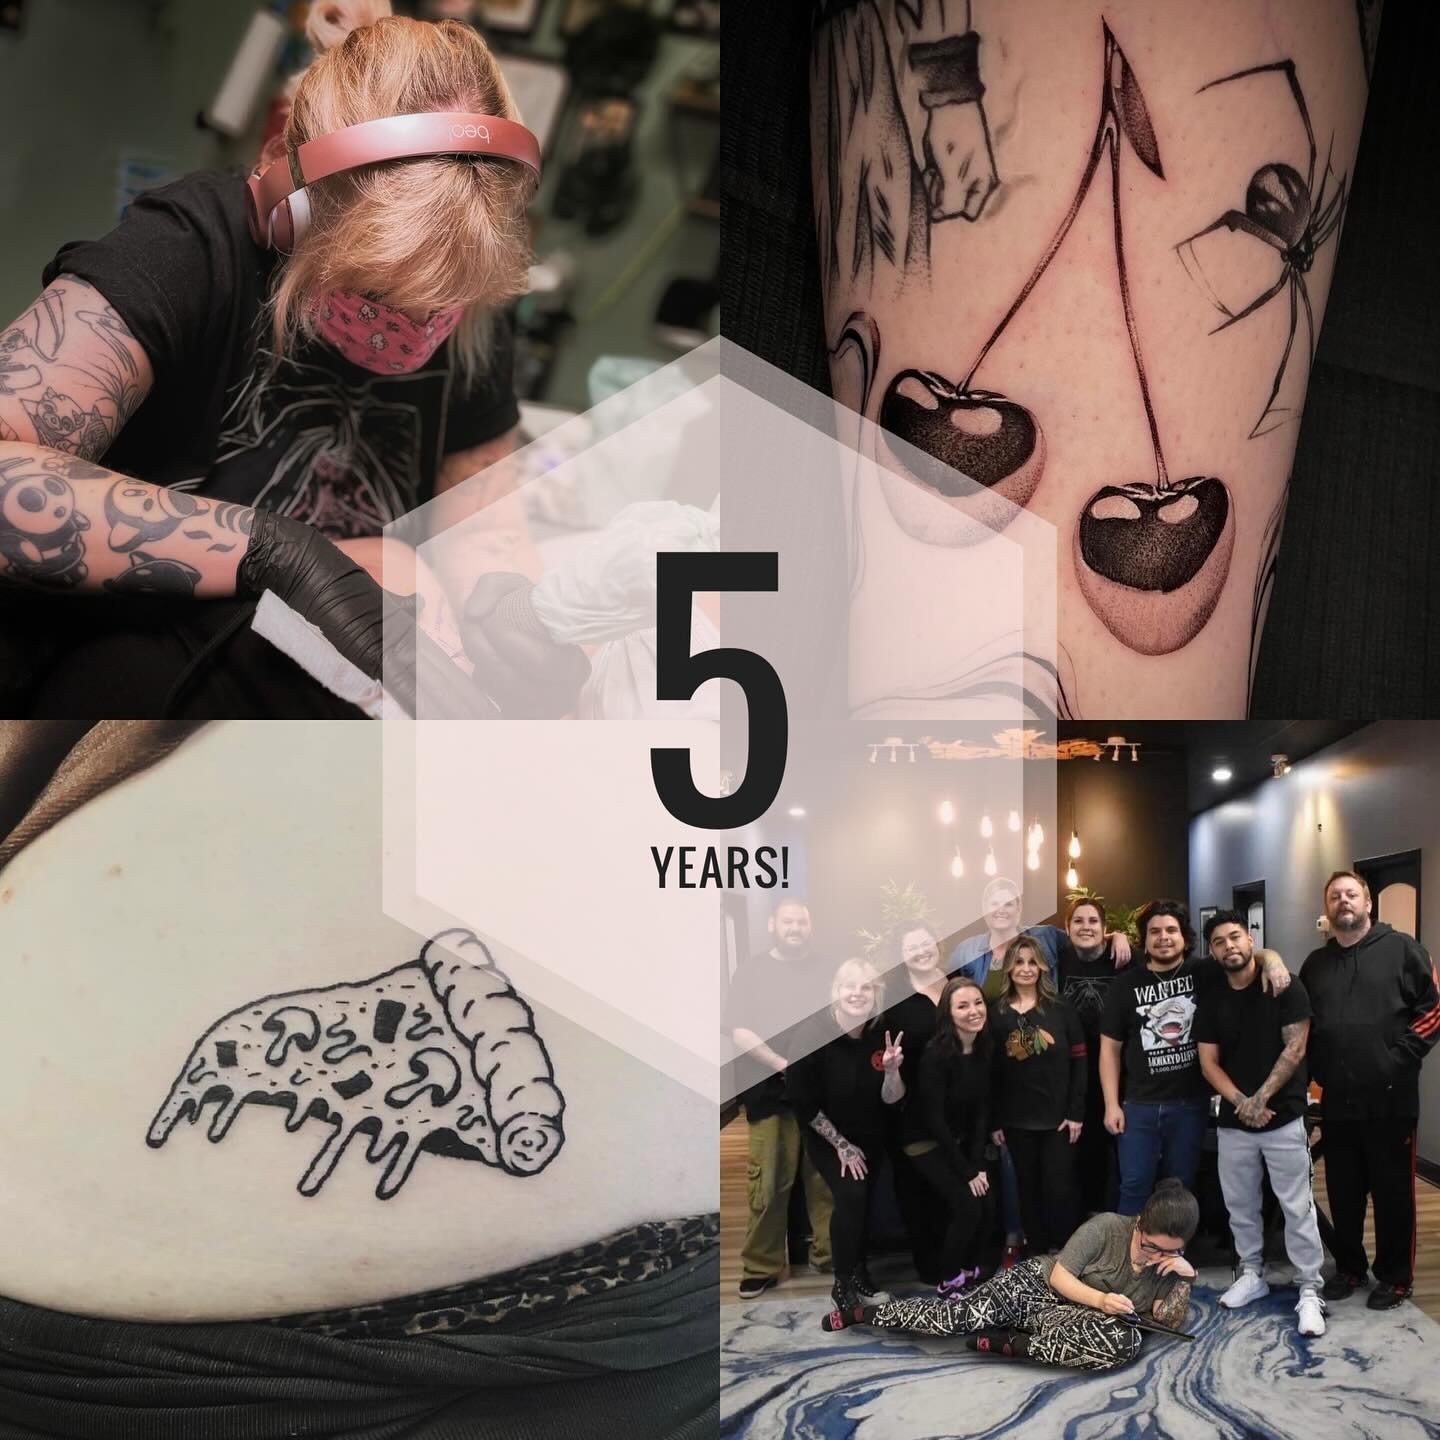 Today marks 5 years of entering my tattoo journey 🥹 I can&rsquo;t believe how quickly it&rsquo;s gone by! I&rsquo;ve done thousands of tattoos, met thousands of amazing strangers, and have worked with the most inspiring, and talented people I&rsquo;